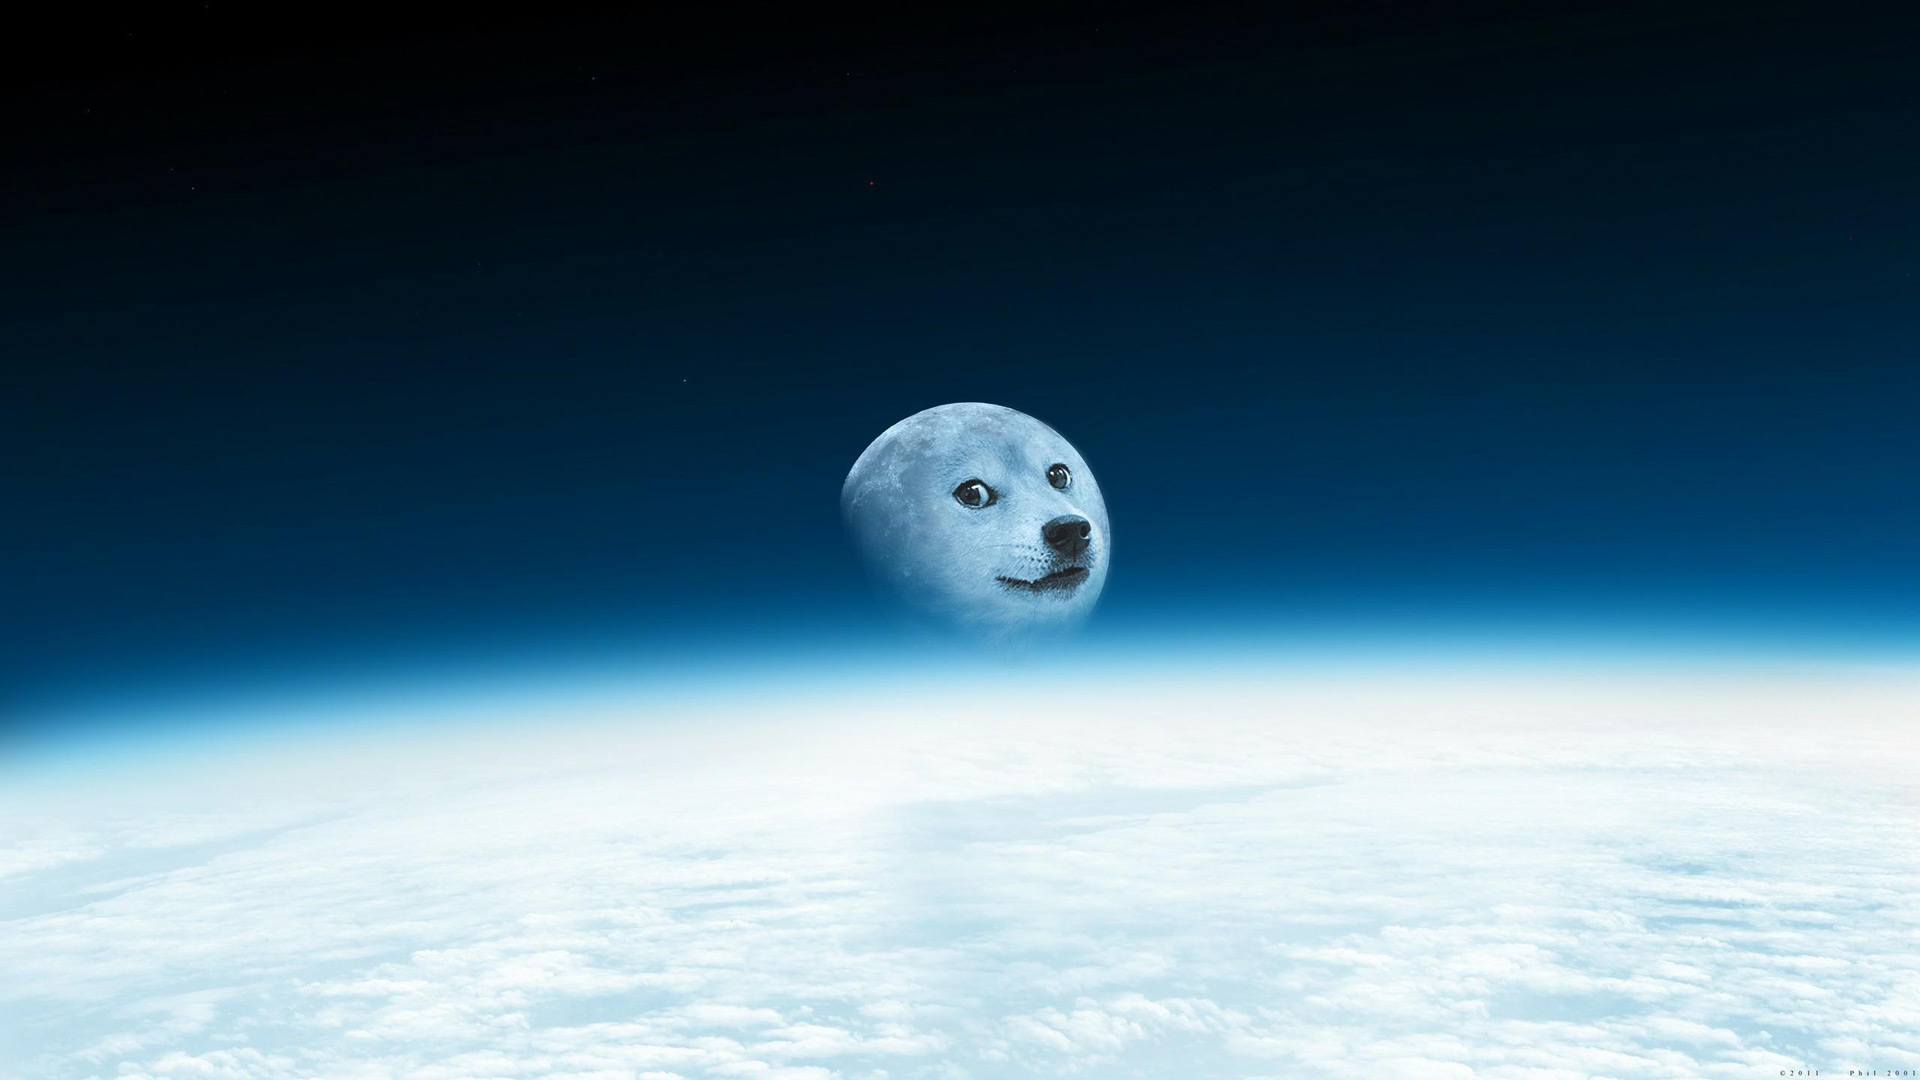 Doge Becomes Moon - Doge Moon Background - HD Wallpaper 